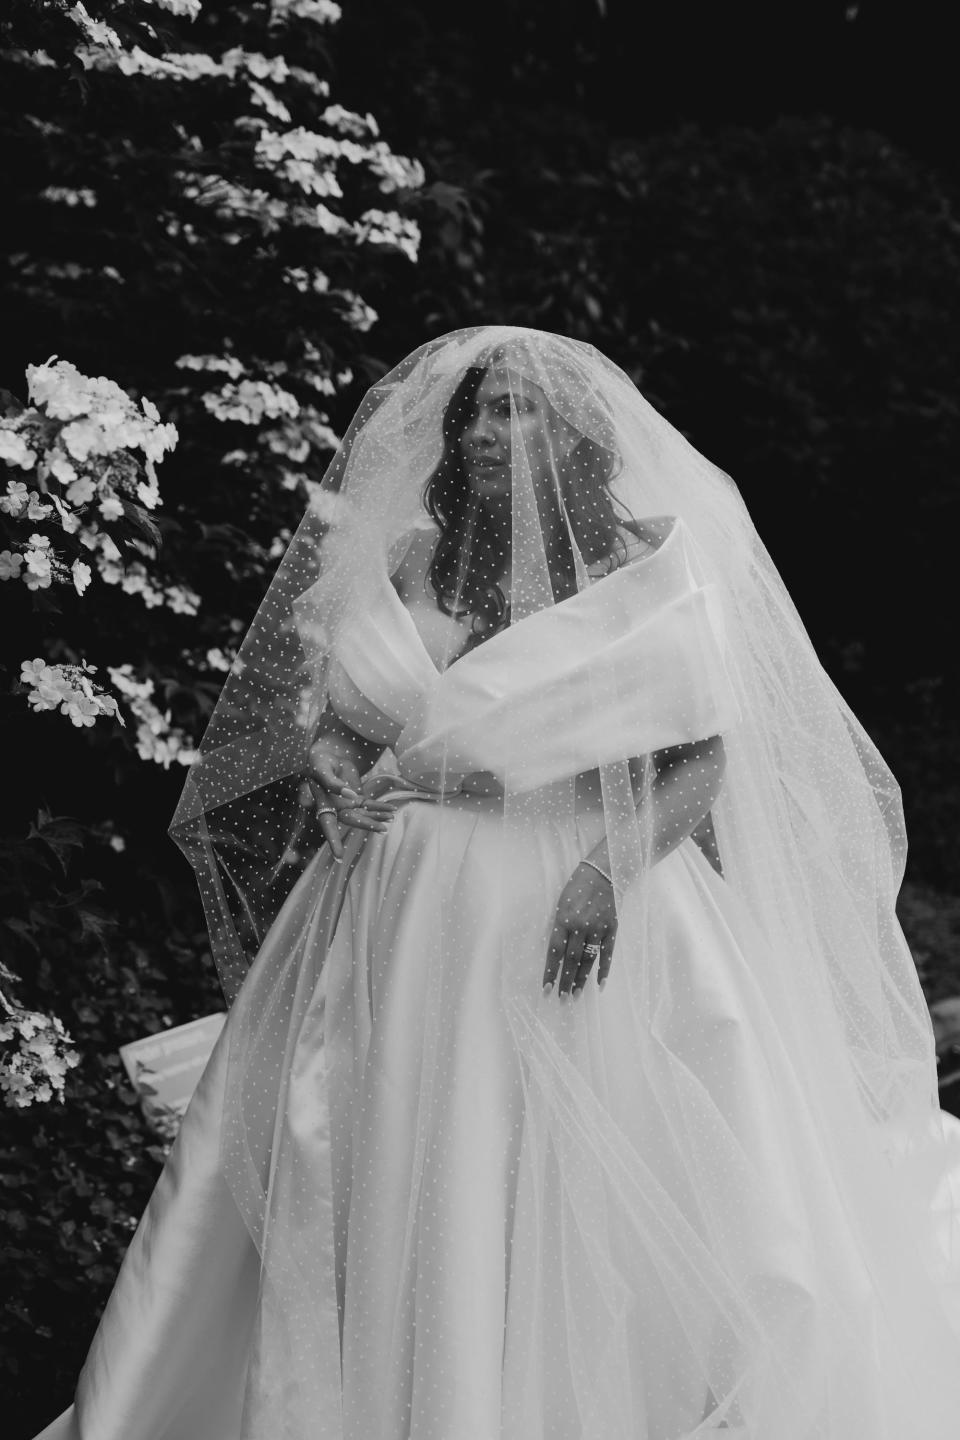 A black-and-white photo of a bride in her wedding dress covered in a veil.